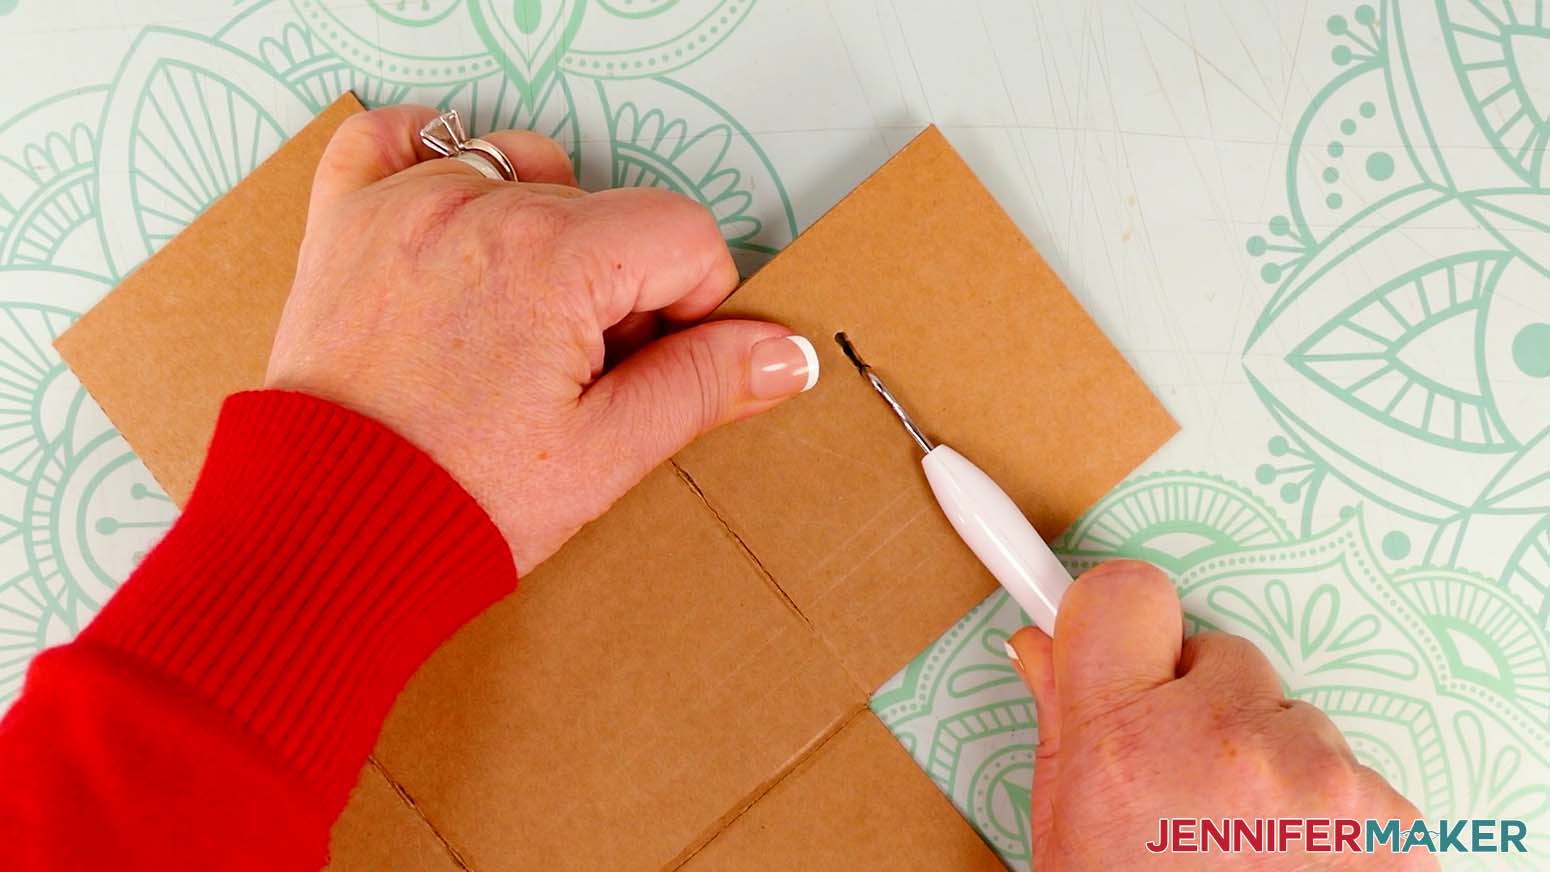 Use a weeding tool to finish making the small slits in the panels for the elastic pieces on the cardboard jumping box